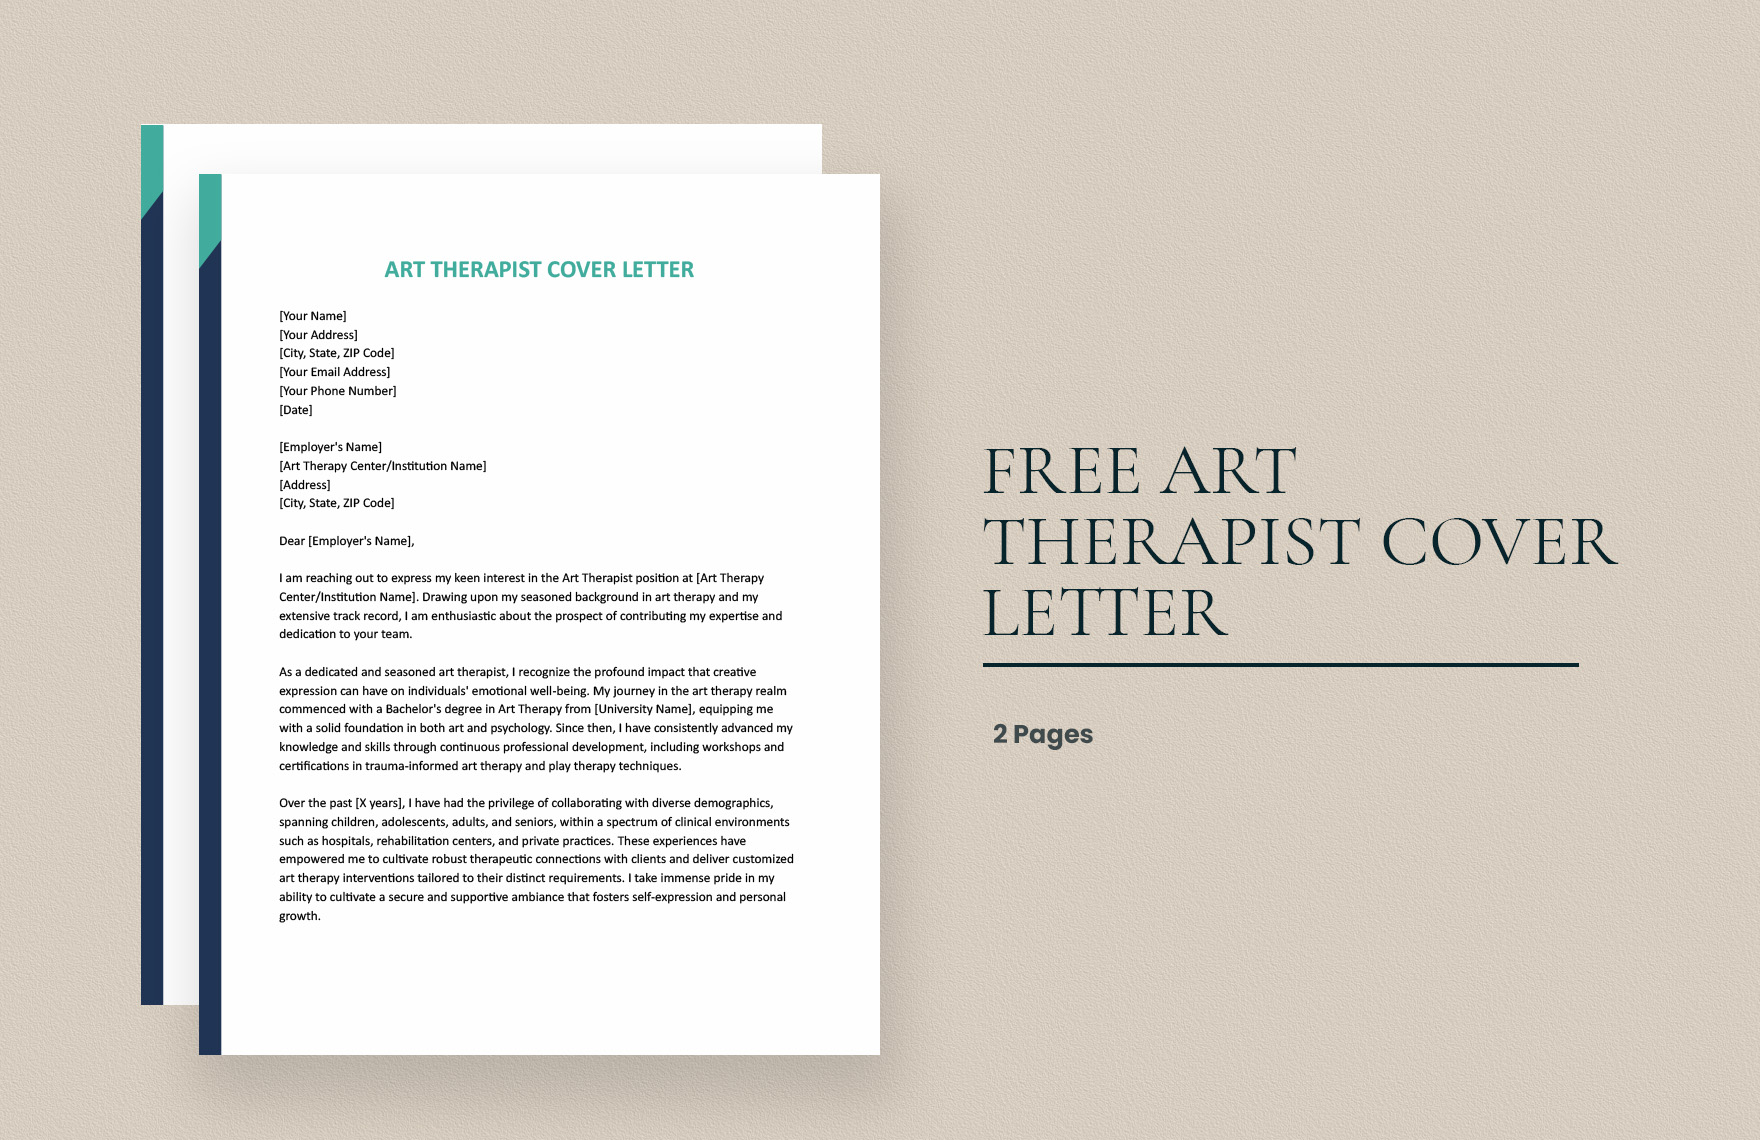 Art Therapist Cover Letter in Word, Google Docs